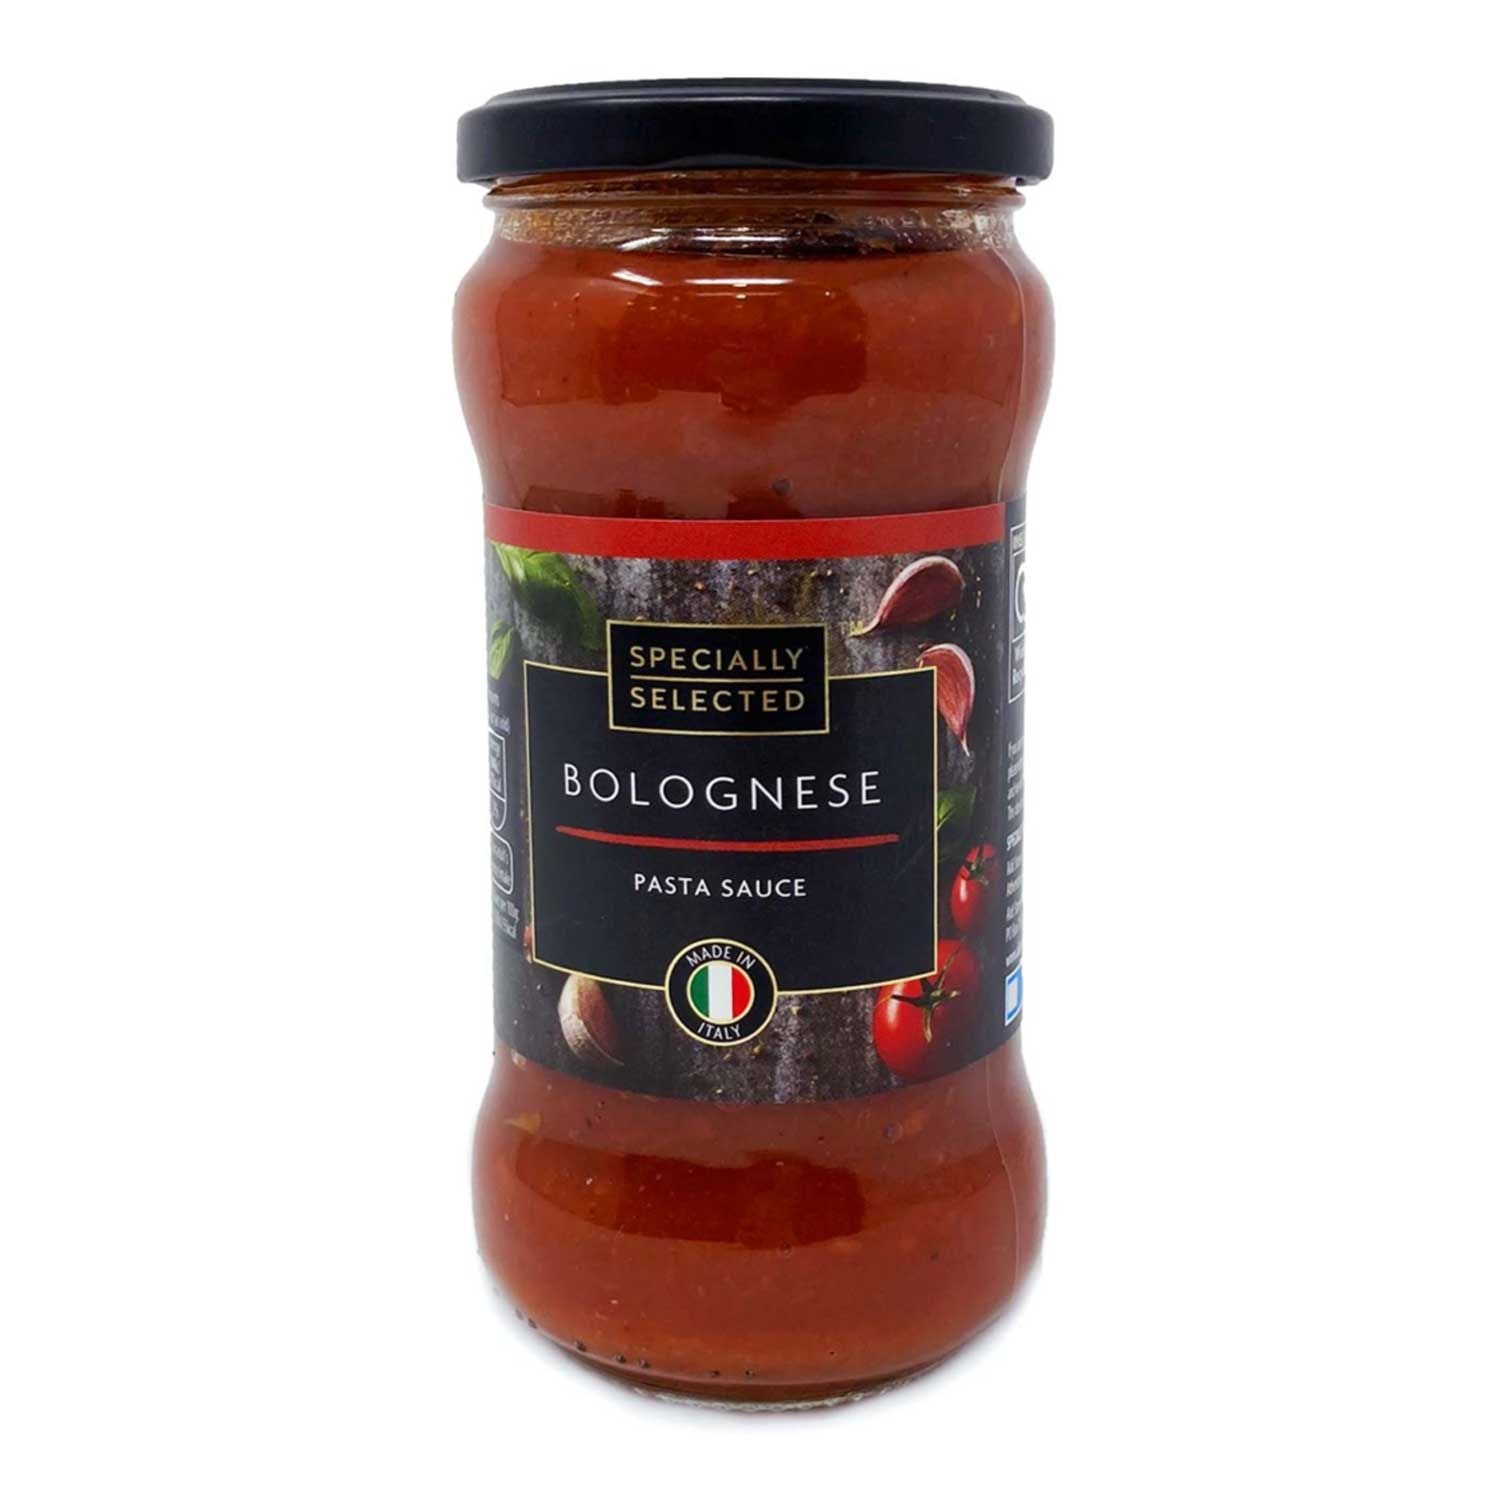 Specially Selected Bolognese Pasta Sauce 340g (2 Pack)